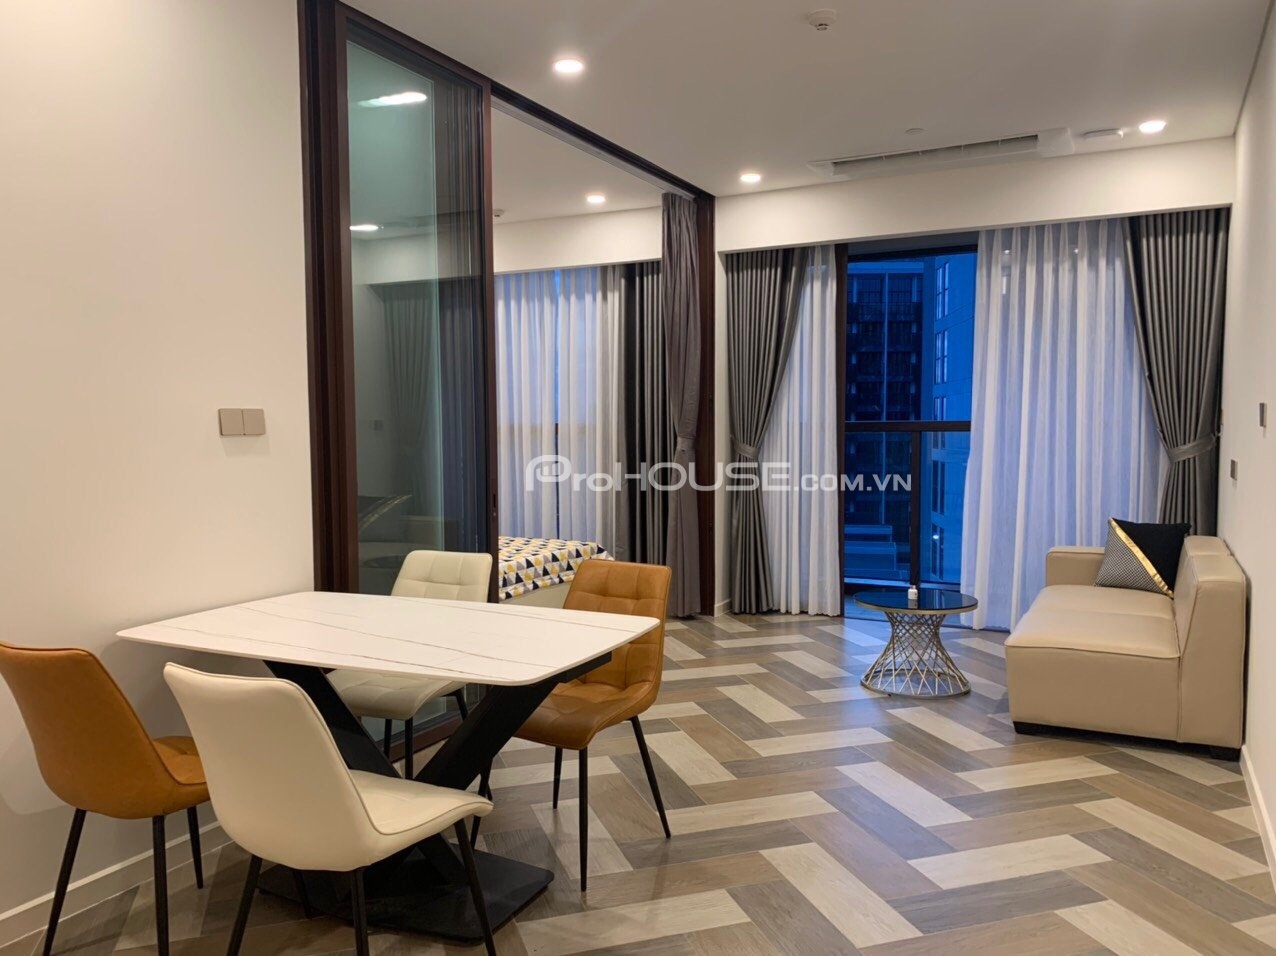 Beautiful view 1 bedroom apartment for sale in The Galleria with full furniture